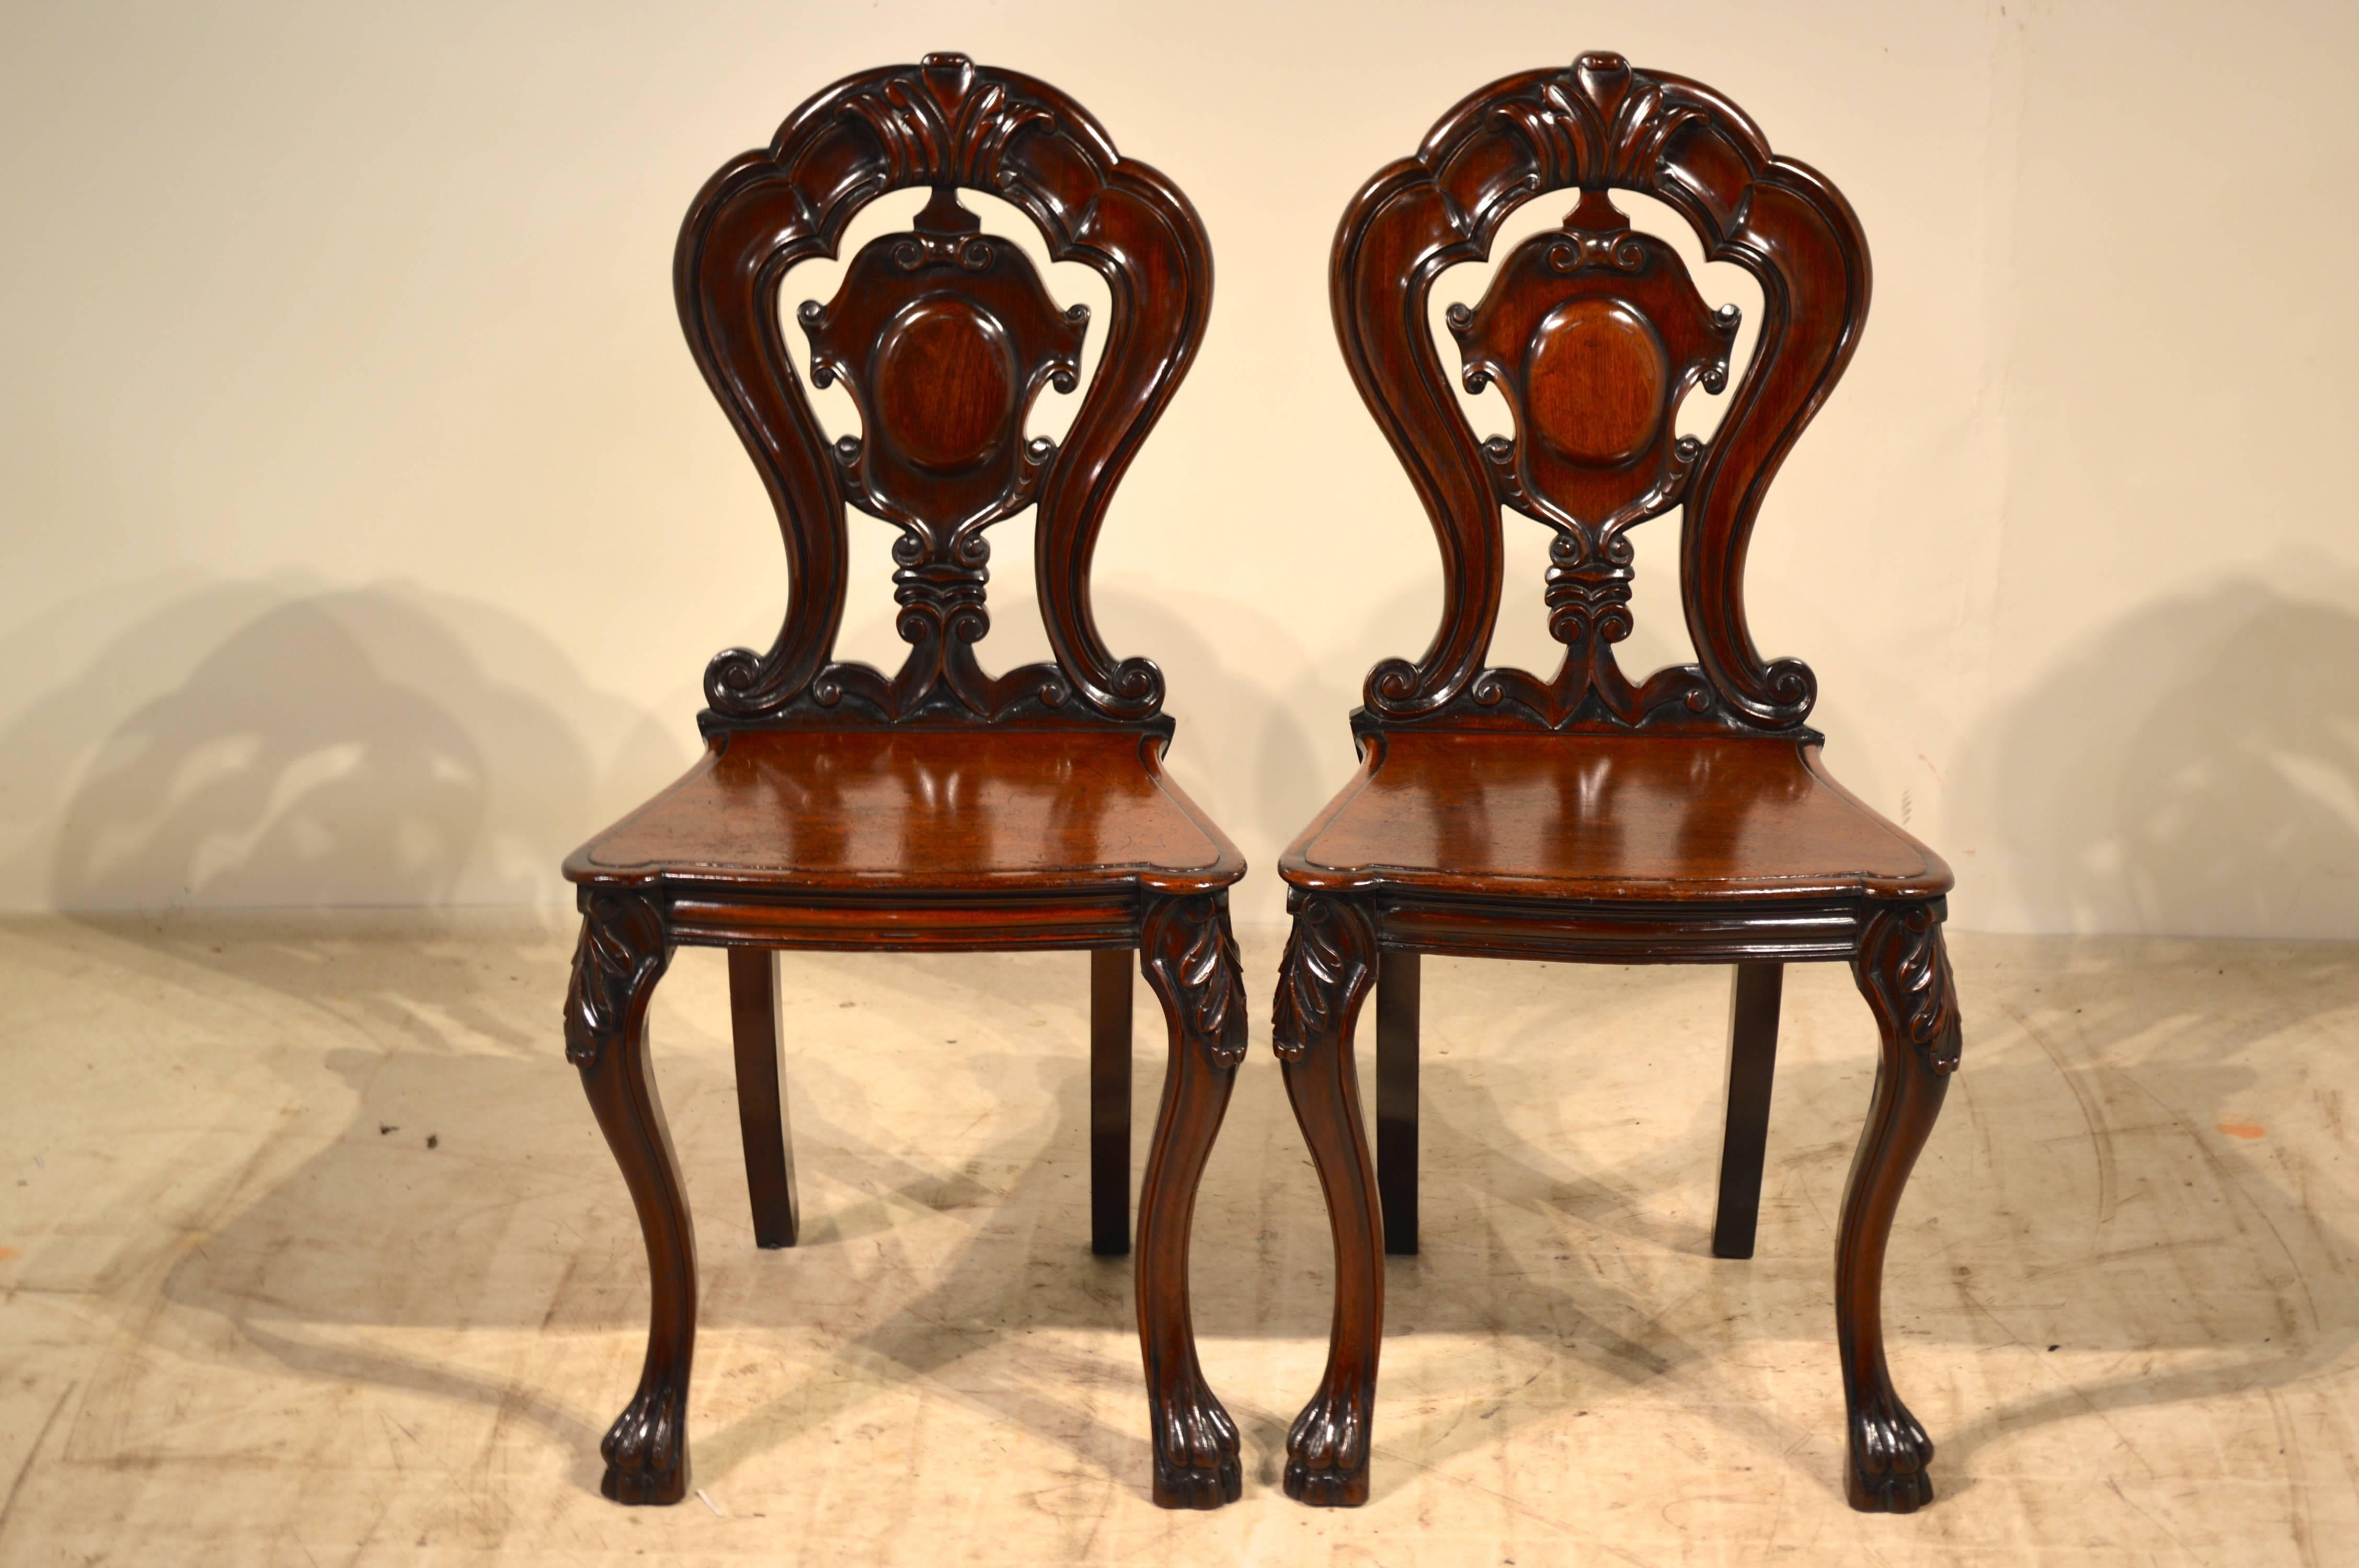 19th century pair of English mahogany hall chairs with wonderfully carved and pierced vase backs, scalloped and beveled front edges on the seats, and lovely splayed legs in the back and cabriole legs in the front ending in carved paw feet. Seat